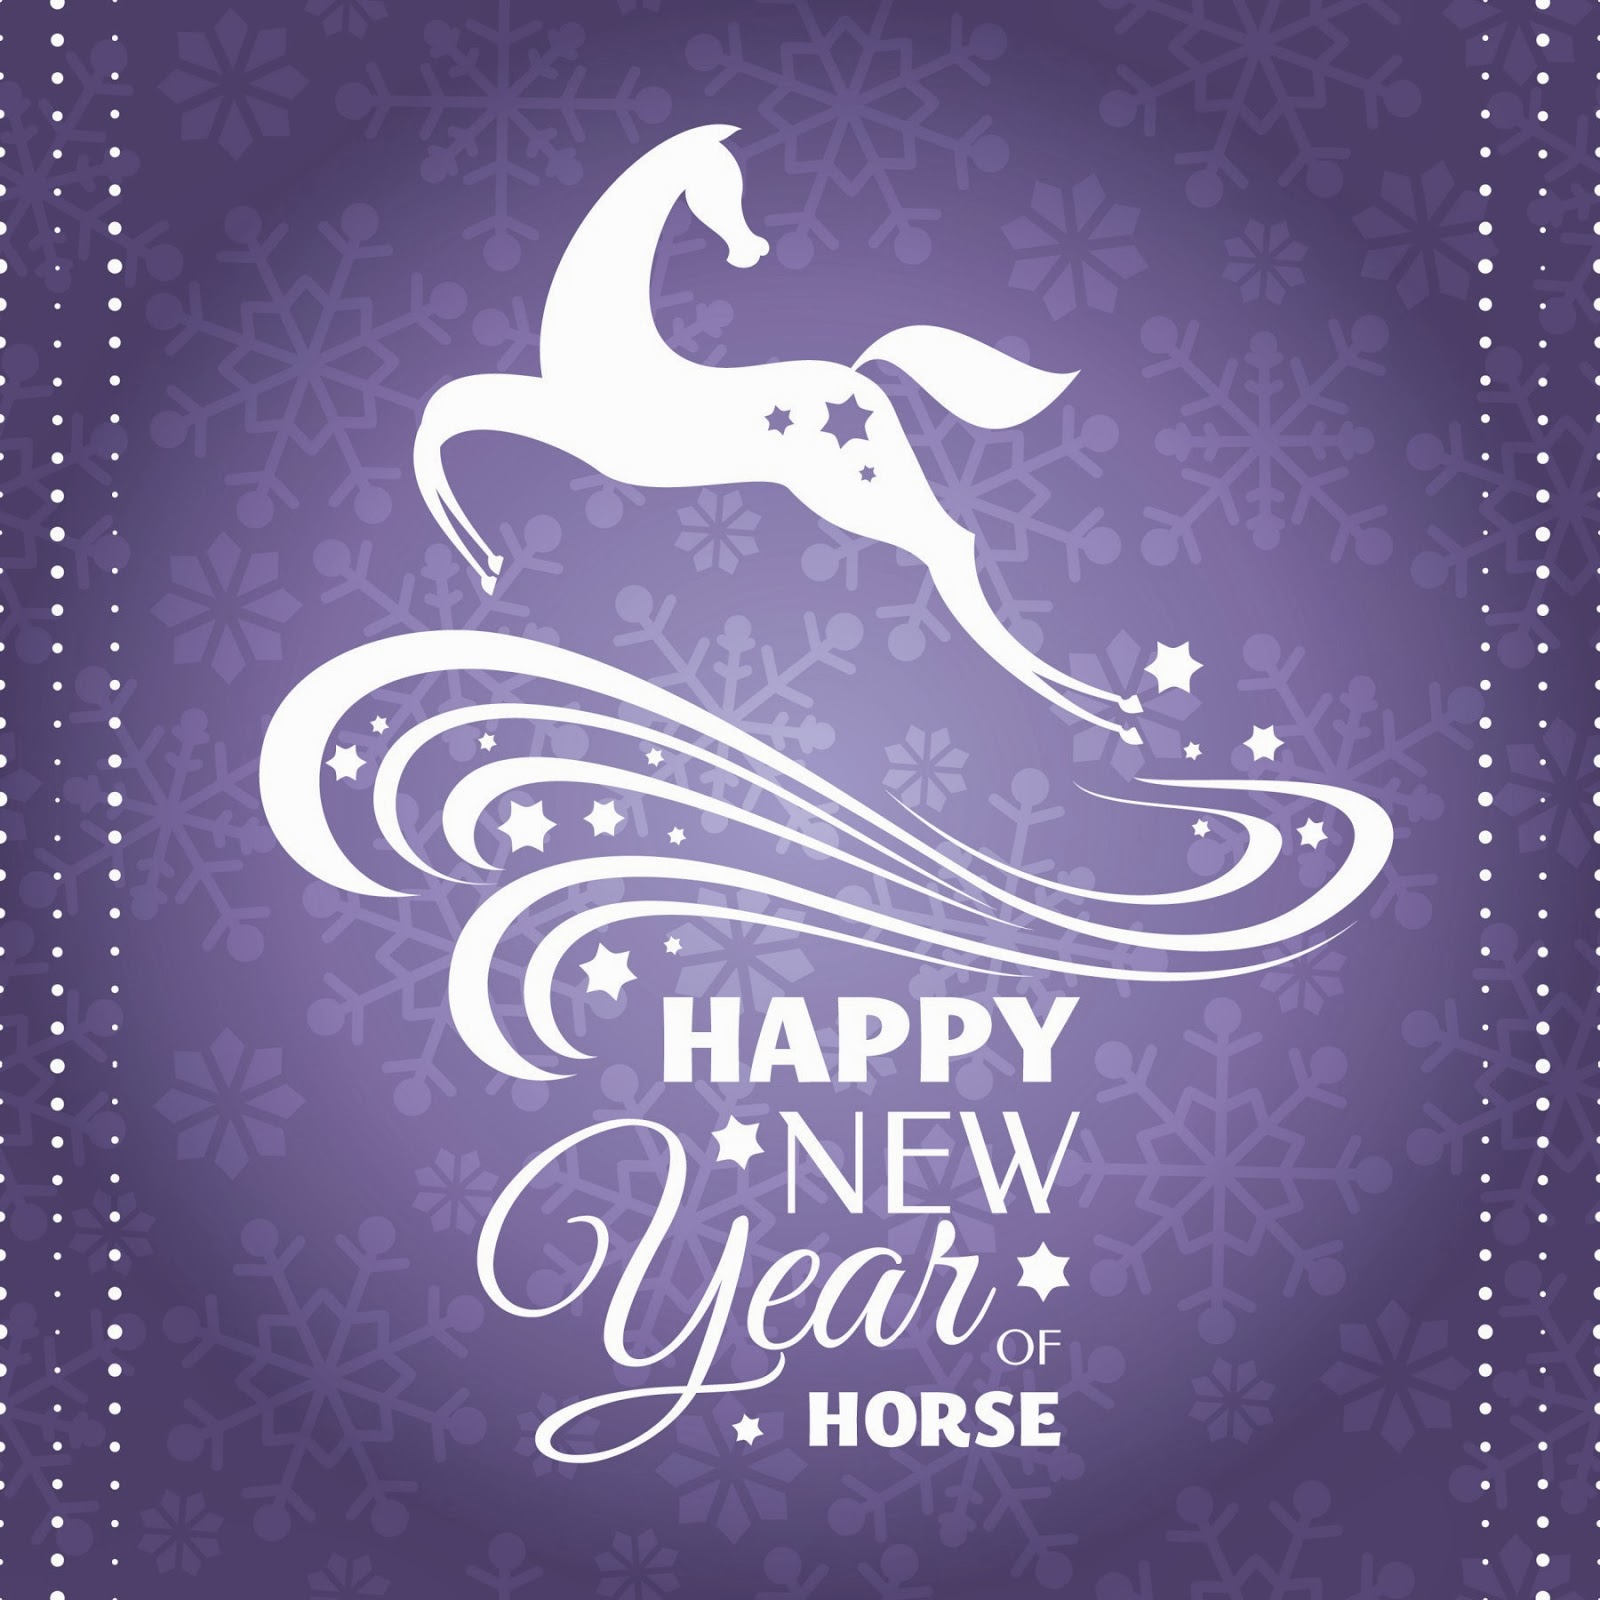 free clip art year of the horse - photo #41